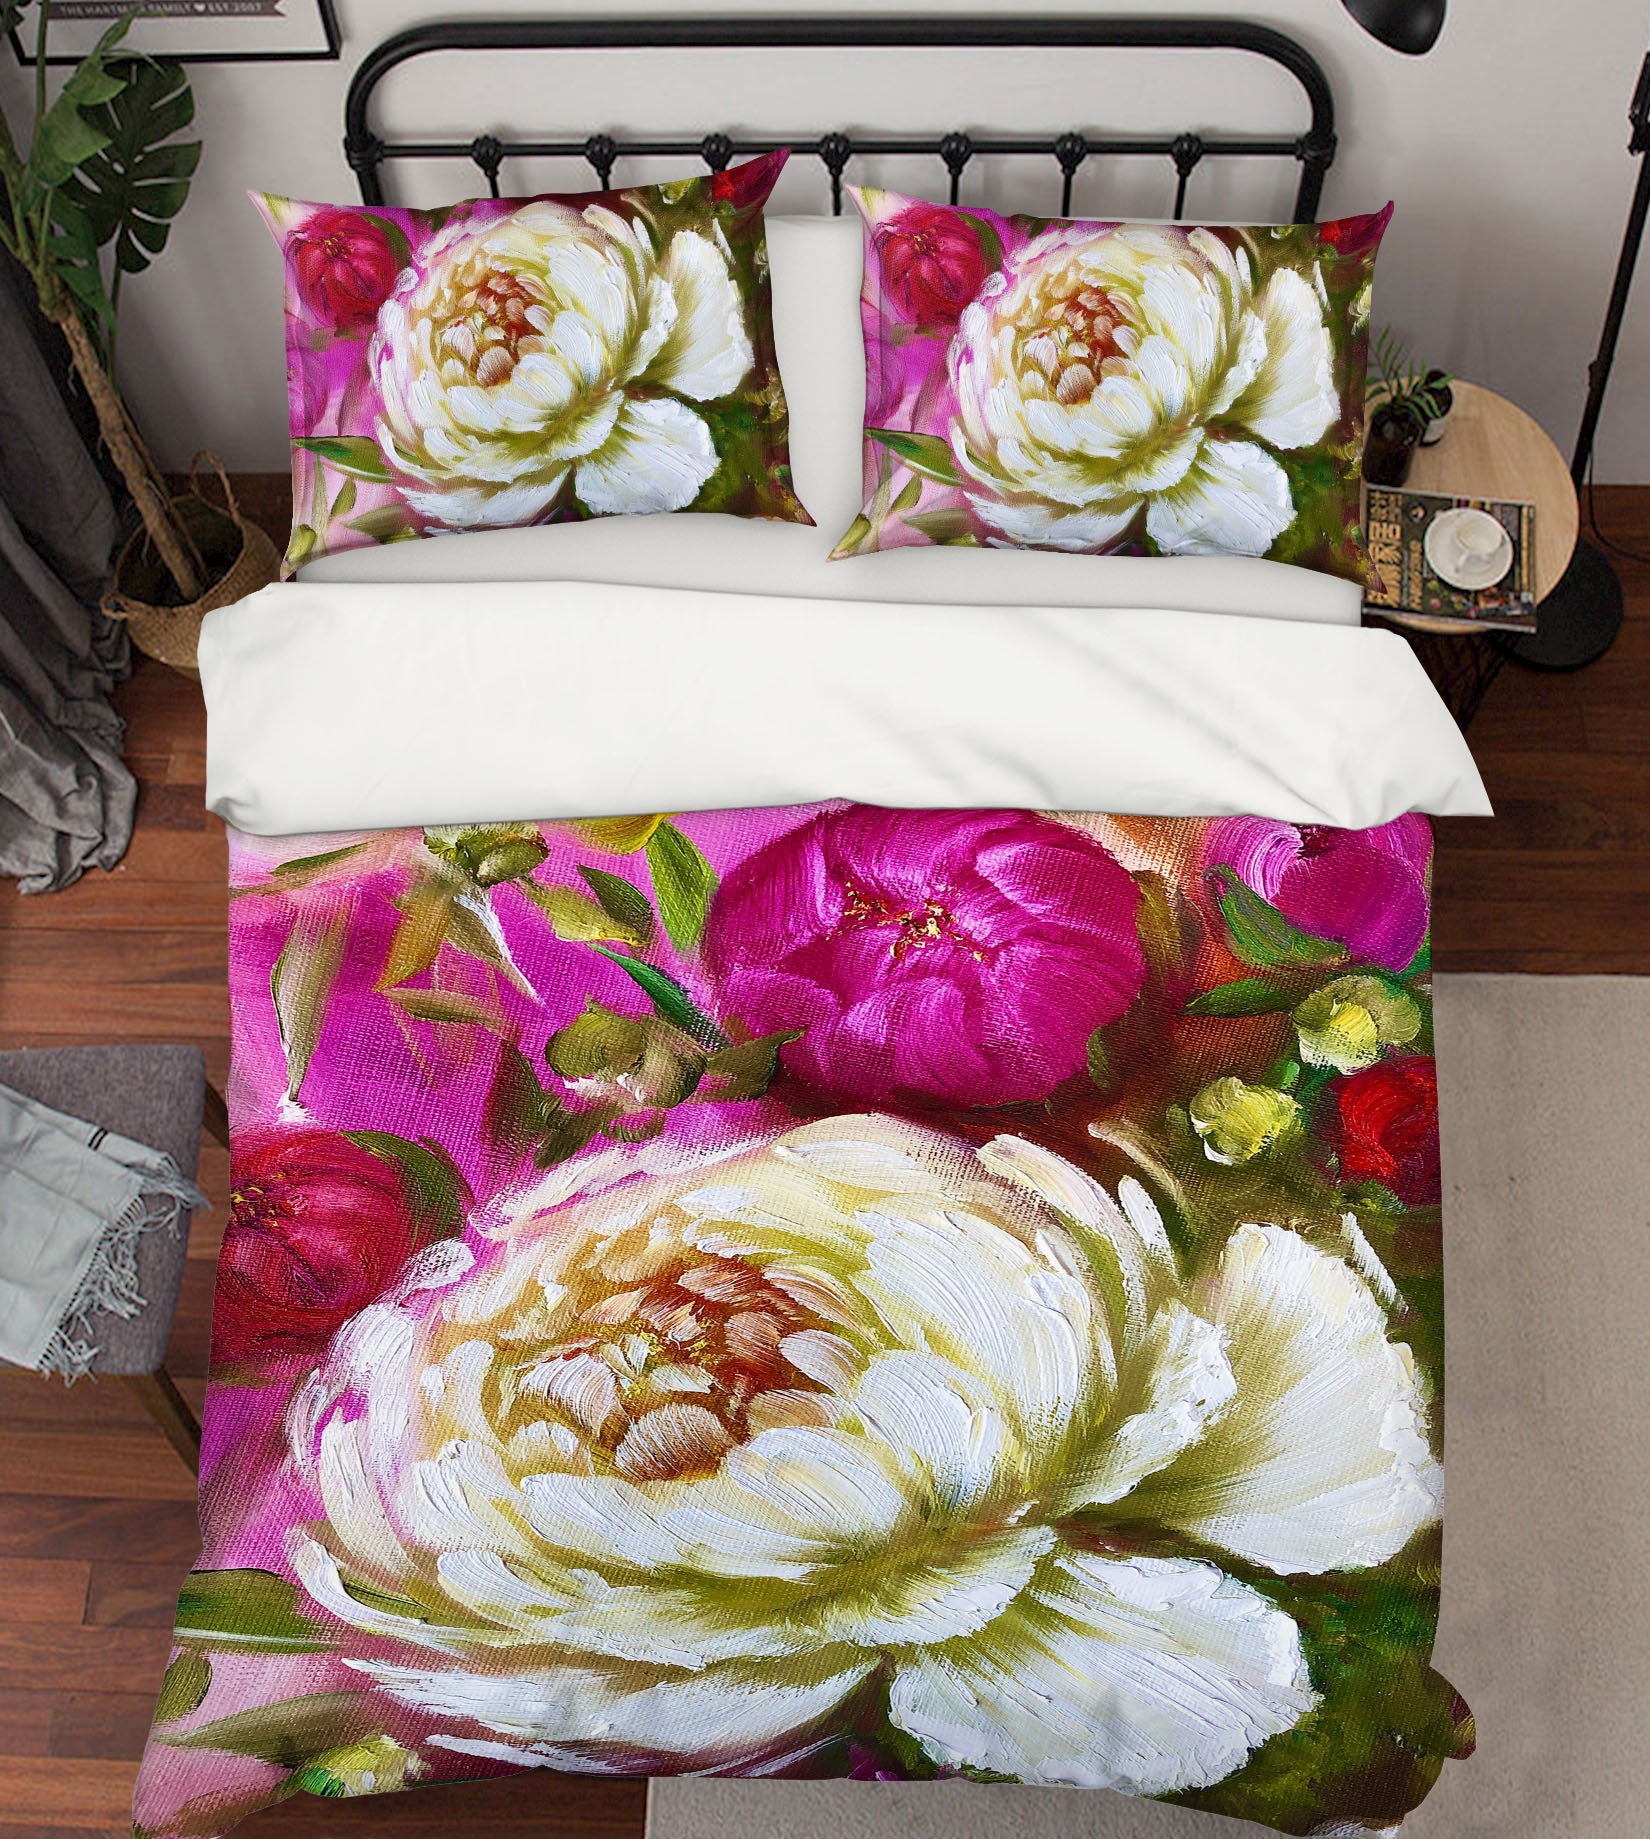 3D Hand Painted Flowers 624 Skromova Marina Bedding Bed Pillowcases Quilt